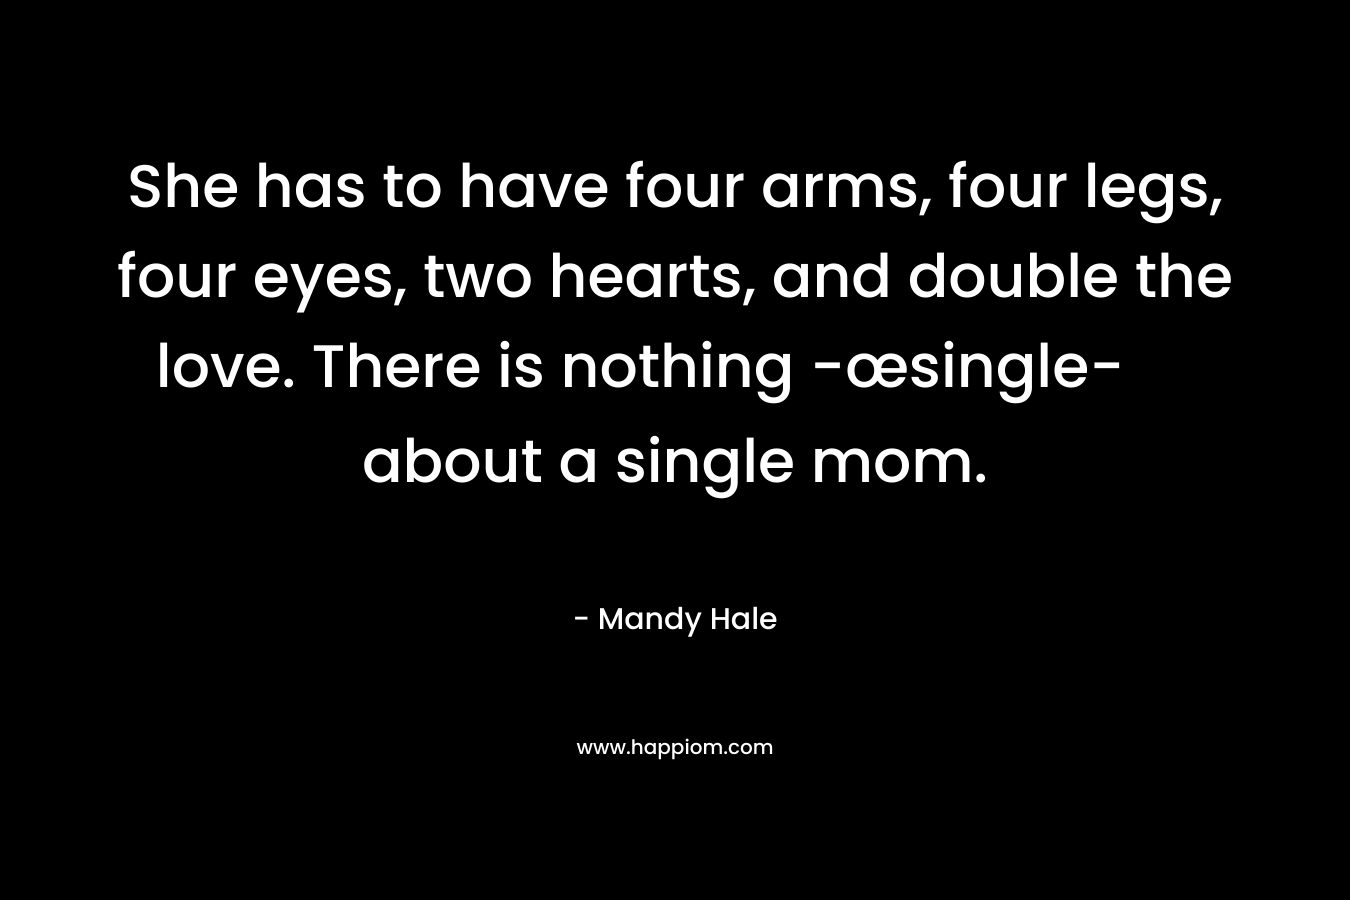 She has to have four arms, four legs, four eyes, two hearts, and double the love. There is nothing -œsingle- about a single mom.